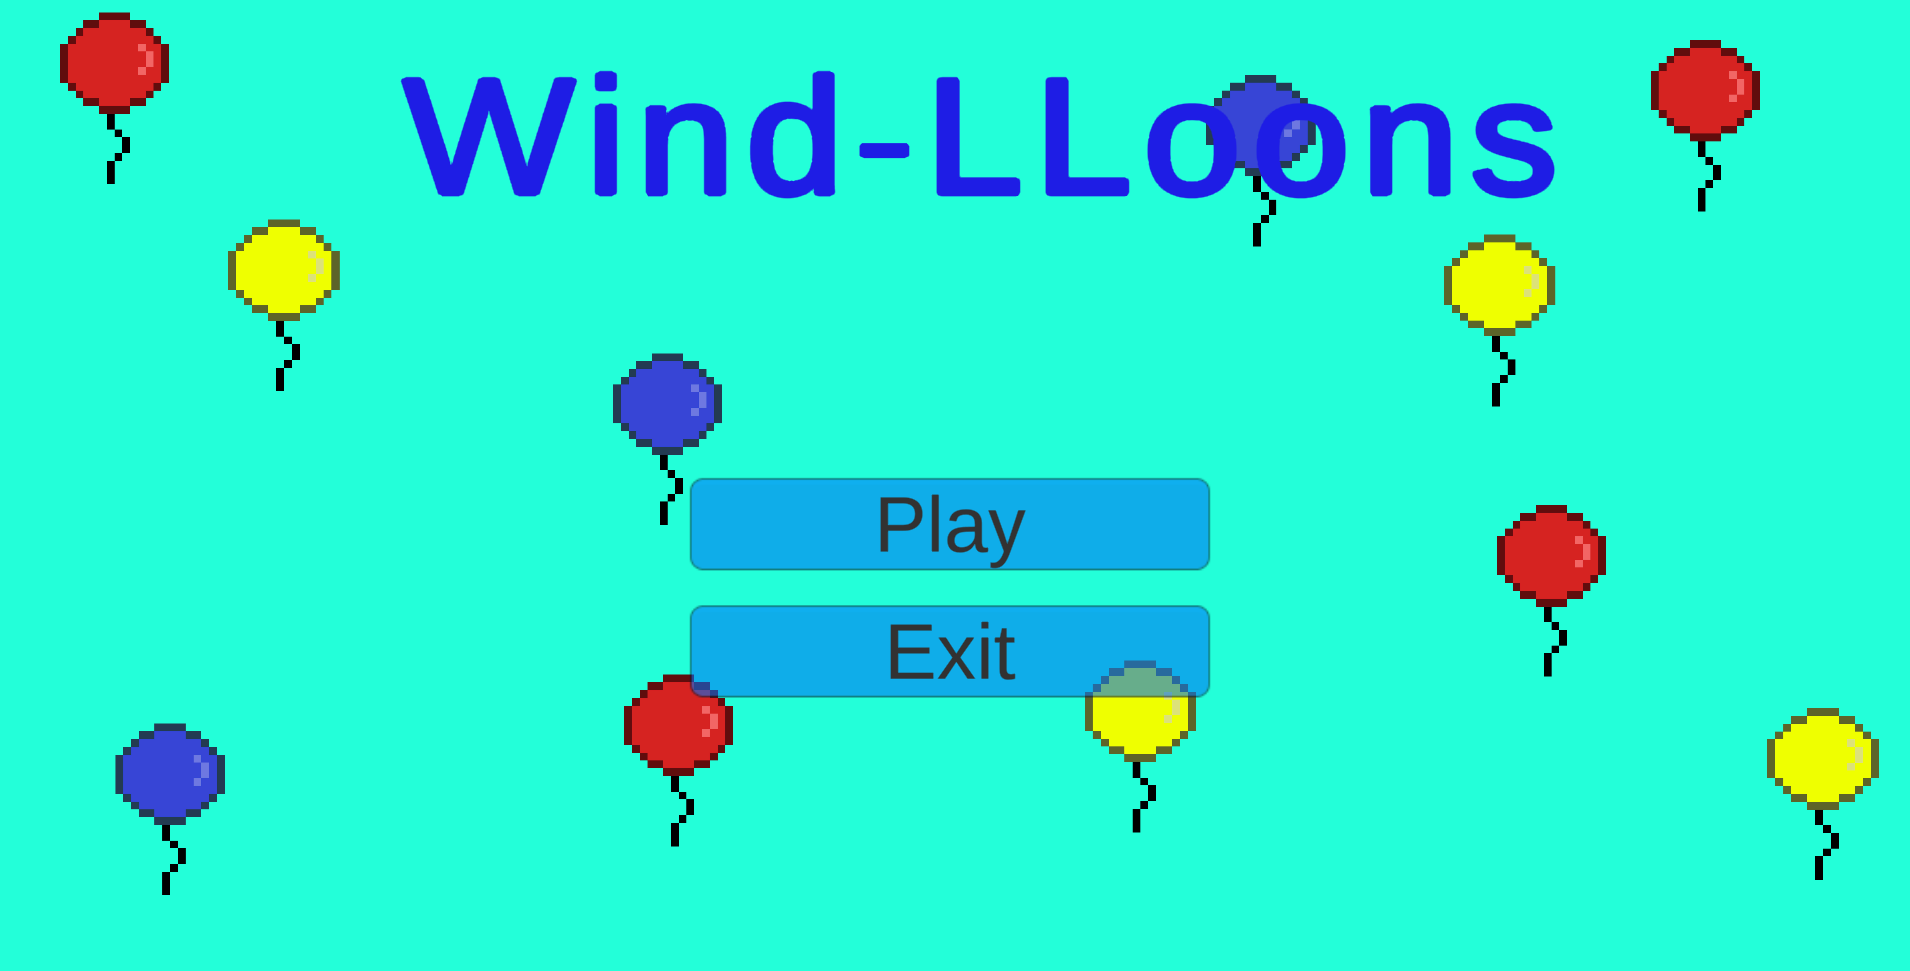 Wind-LLoons